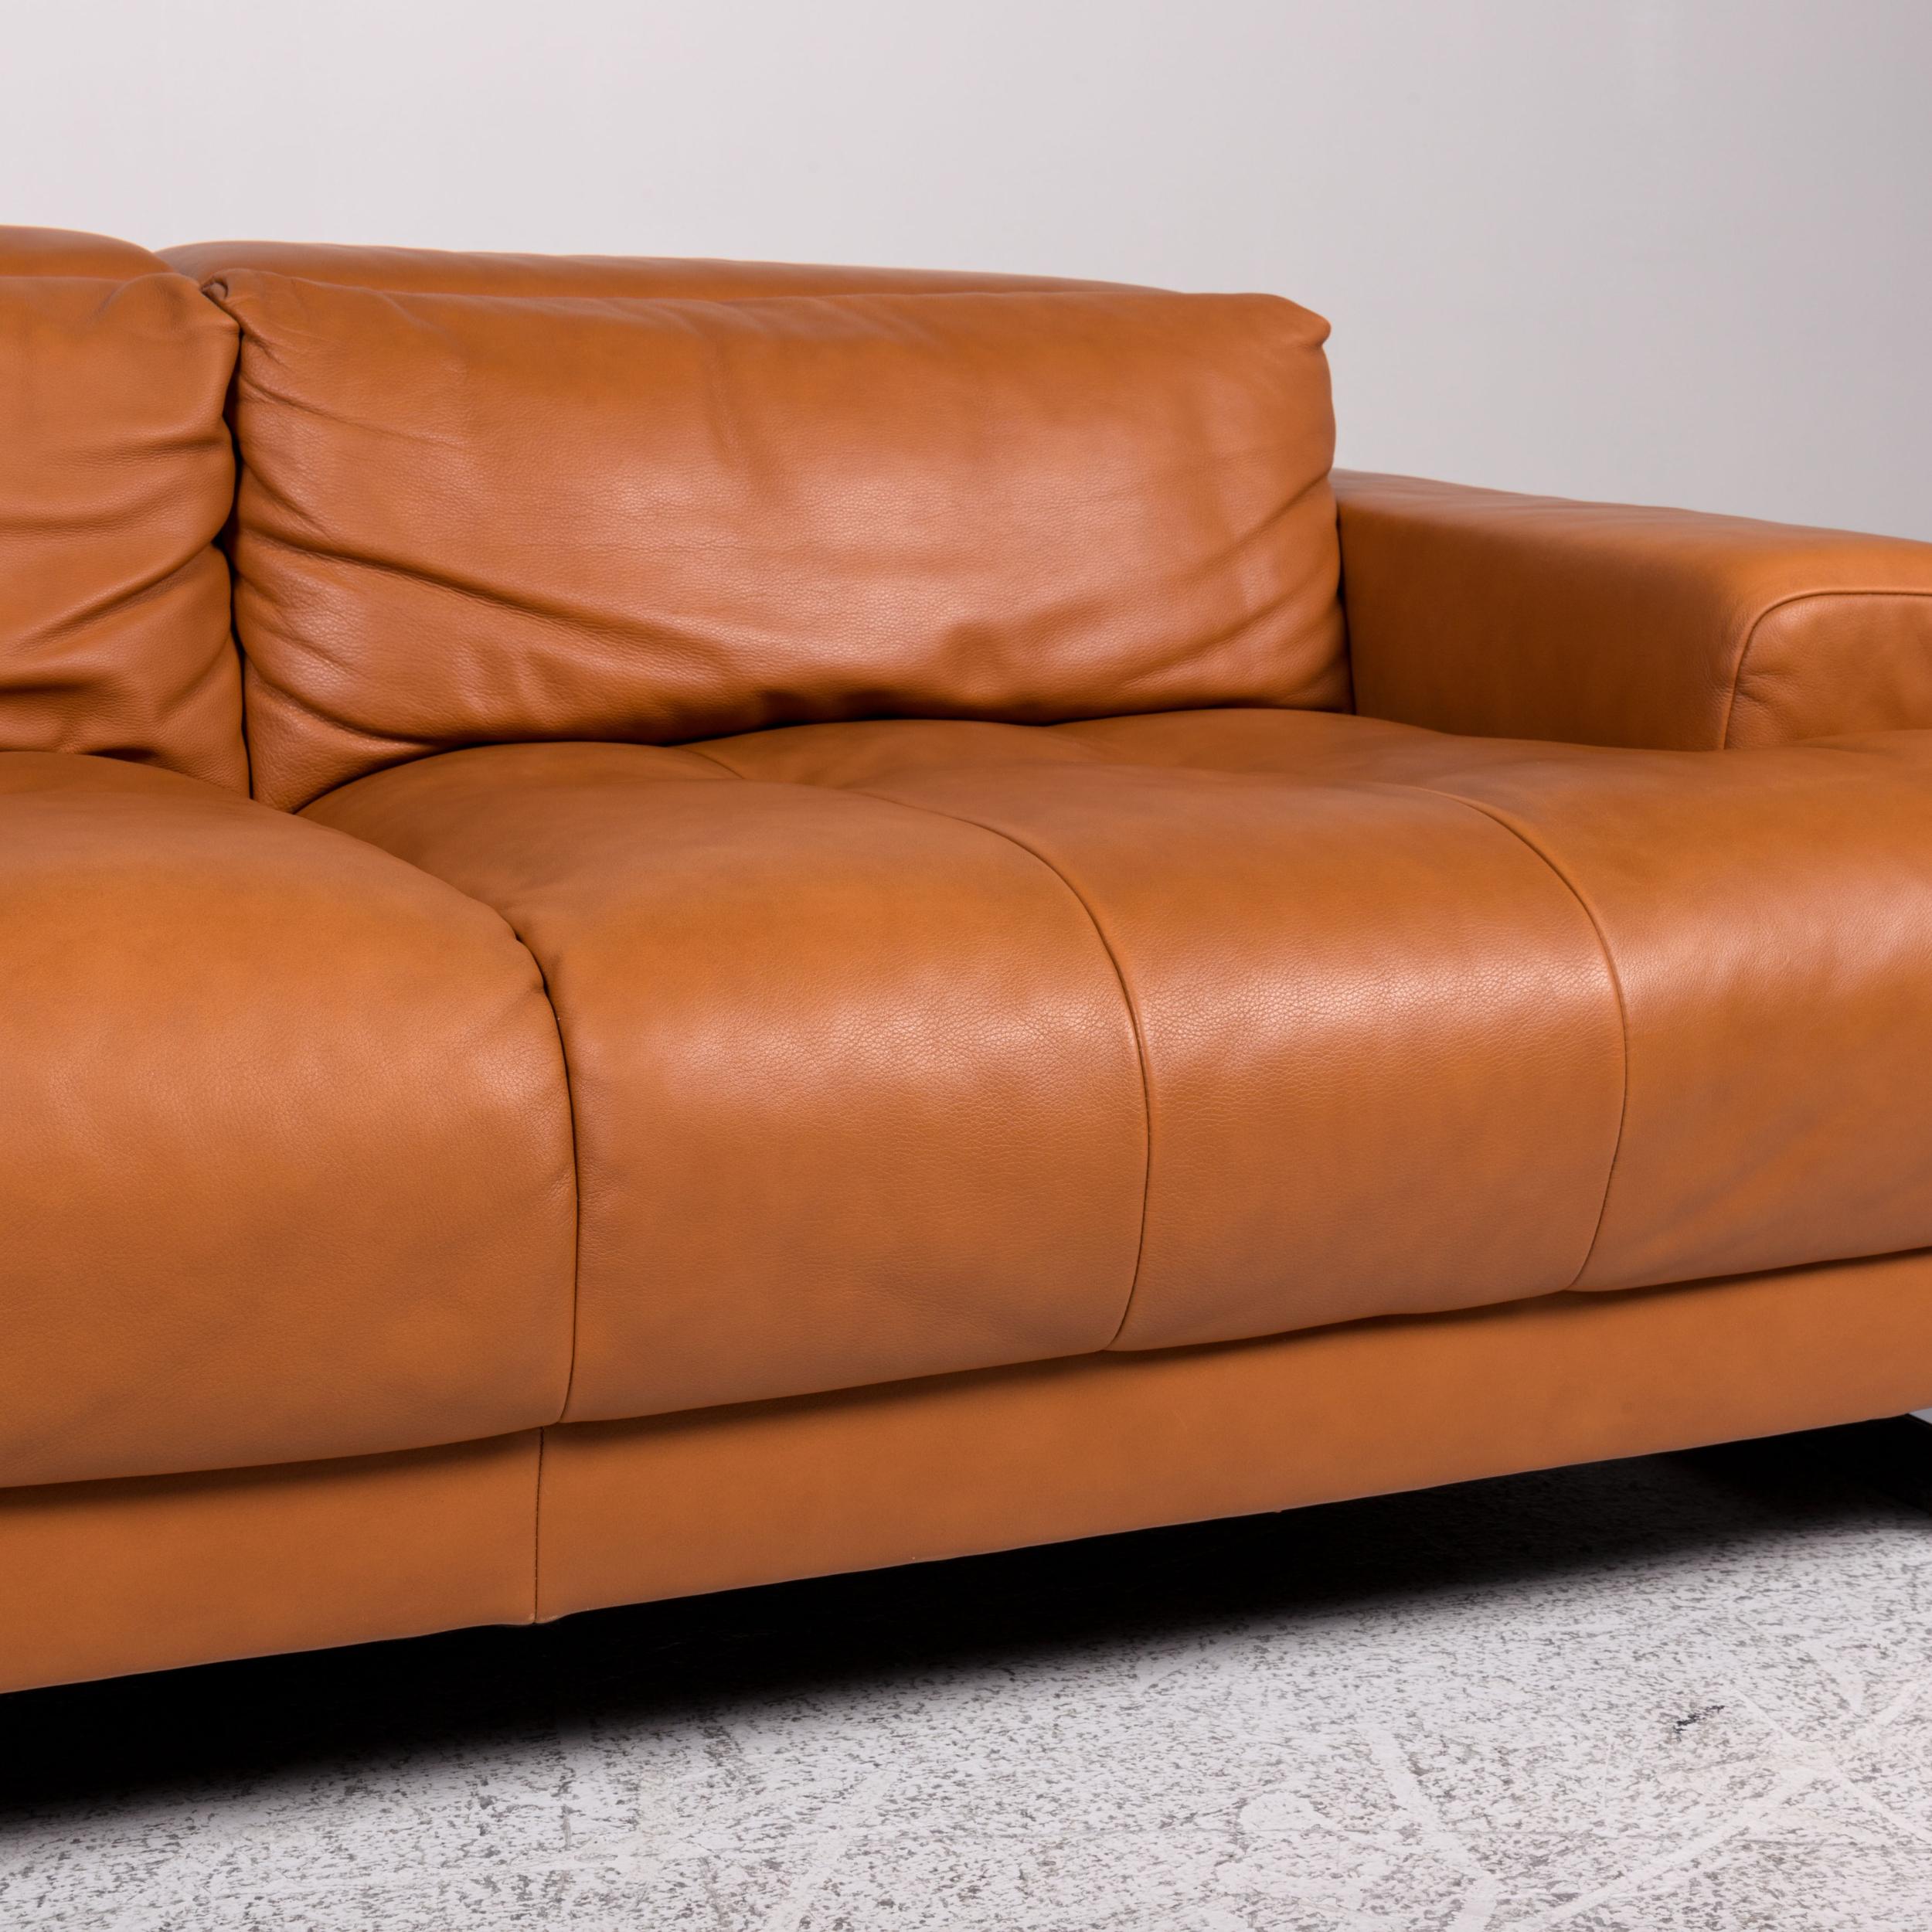 Modern Ewald Schillig Leather Sofa Brown Cognac Three-Seater Couch For Sale